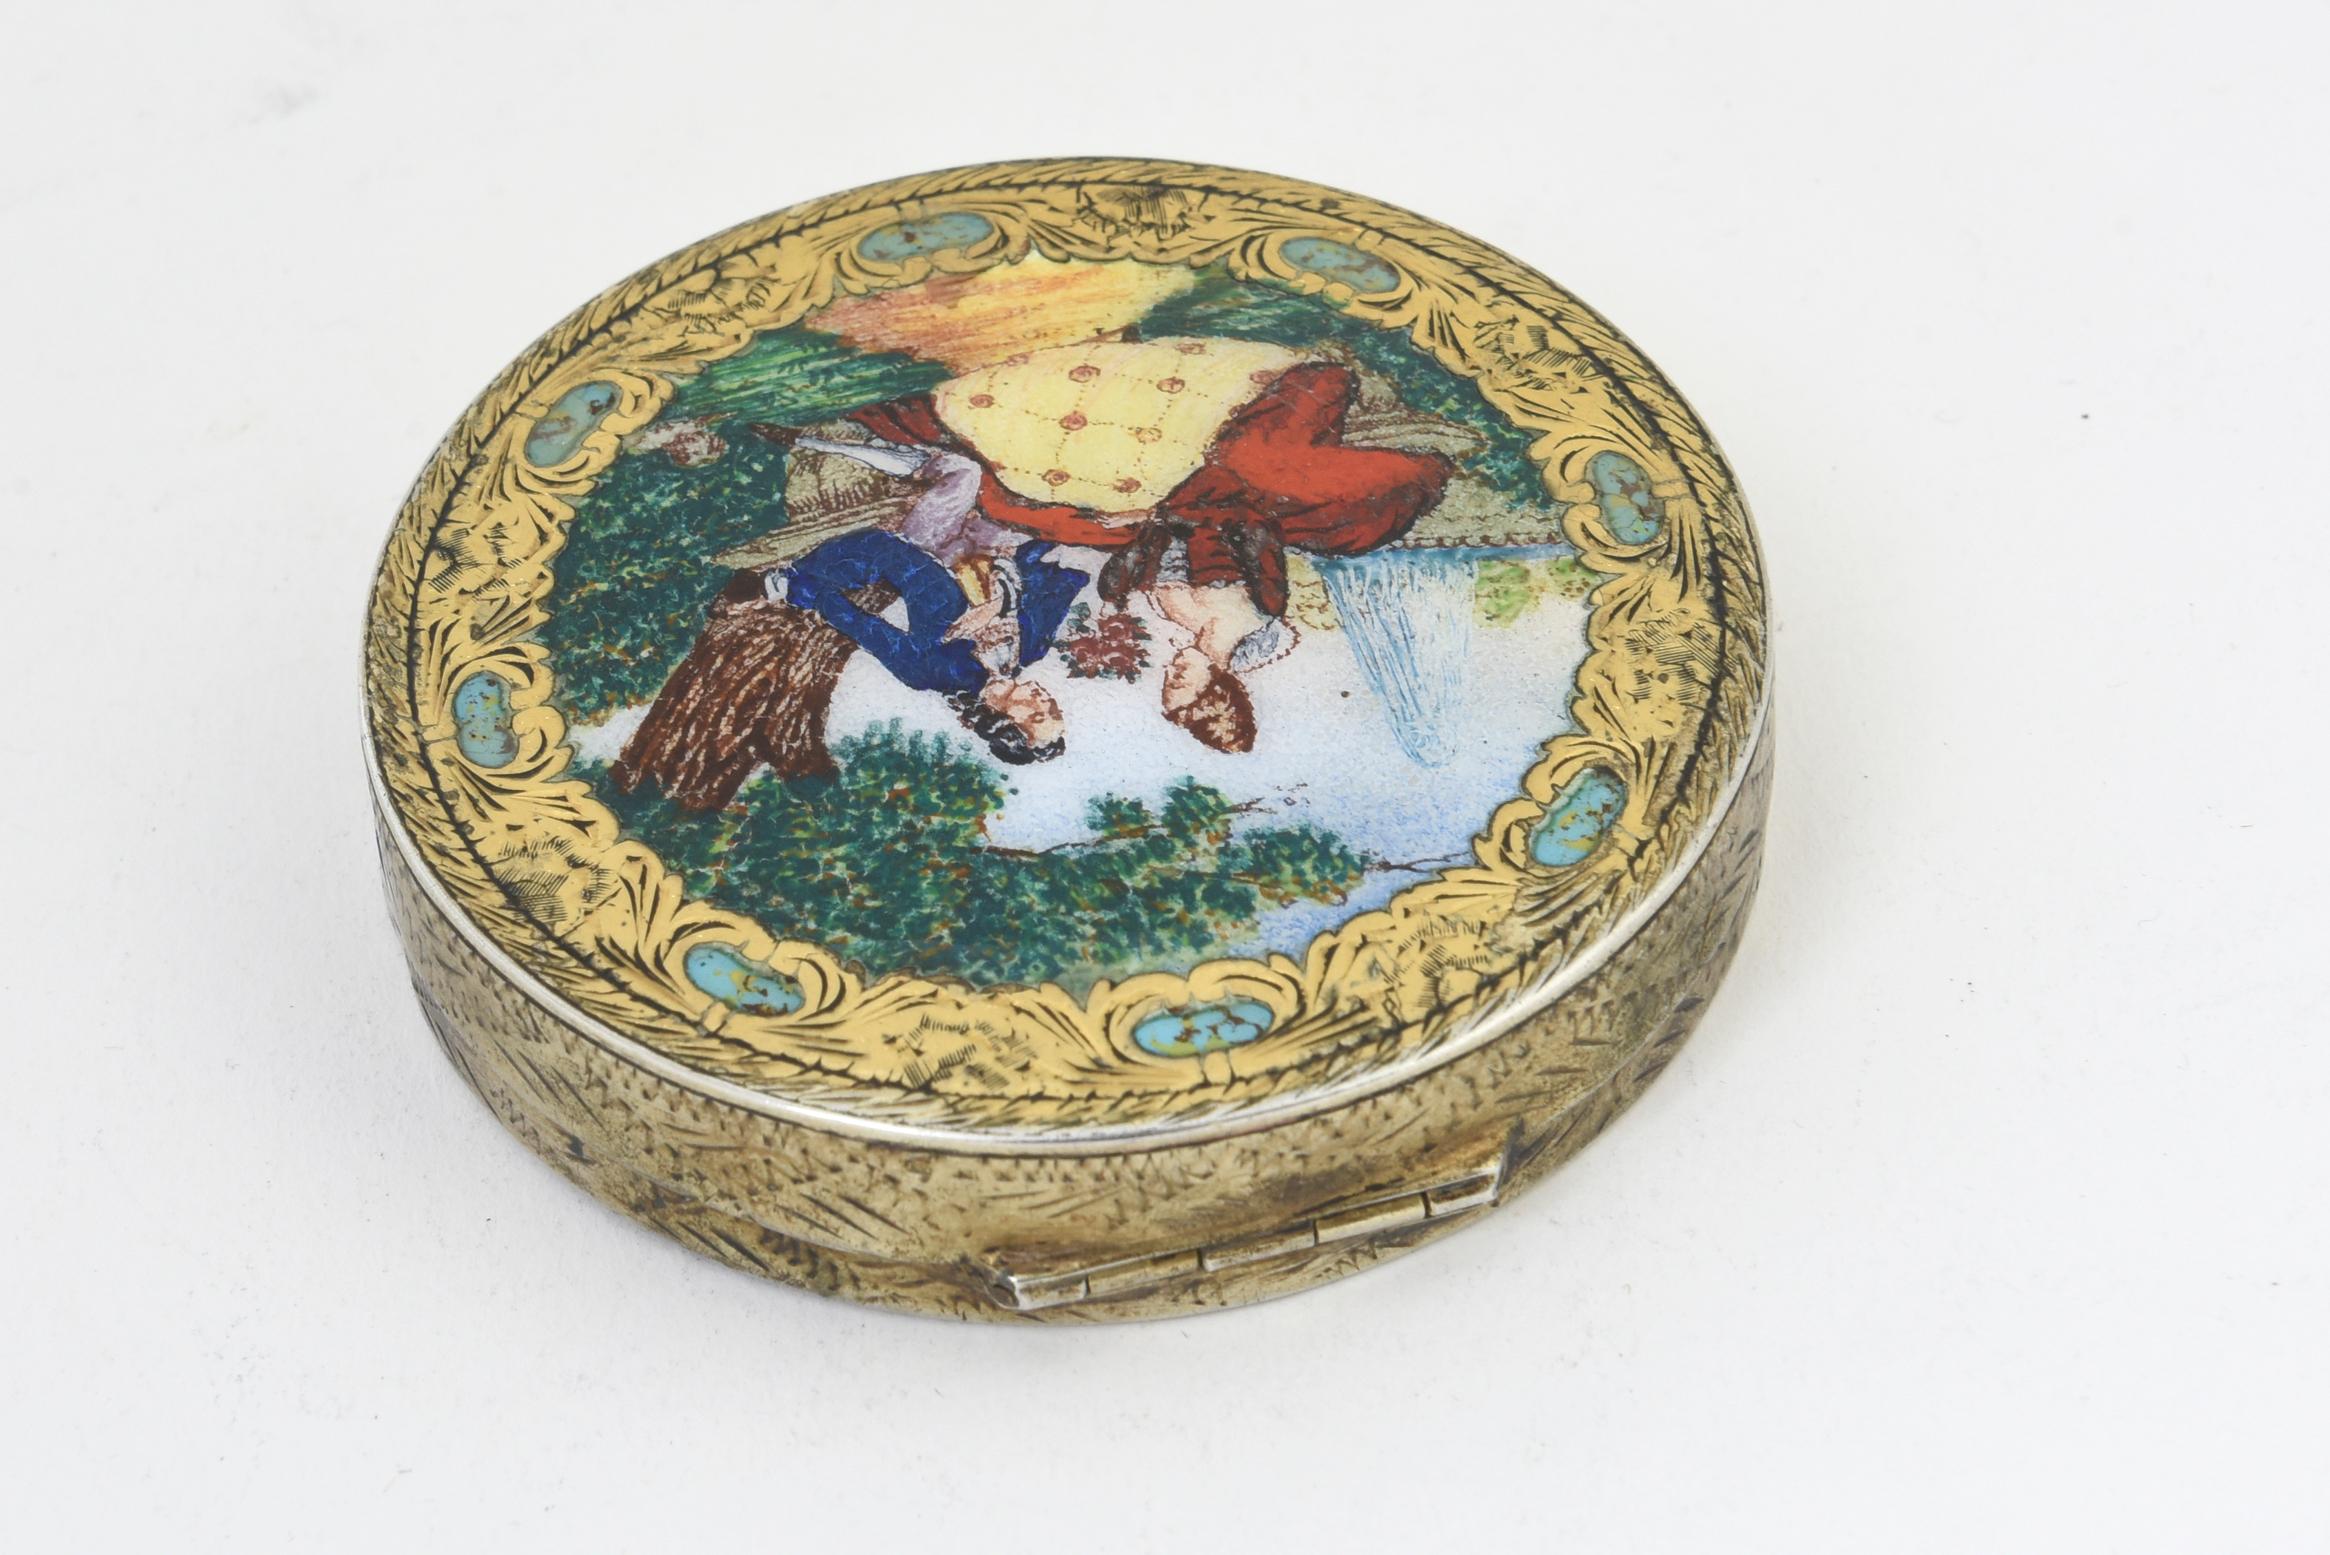 Vintage Midcentury Italian Silver and Enamel Scene Compact Box In Good Condition For Sale In Miami Beach, FL